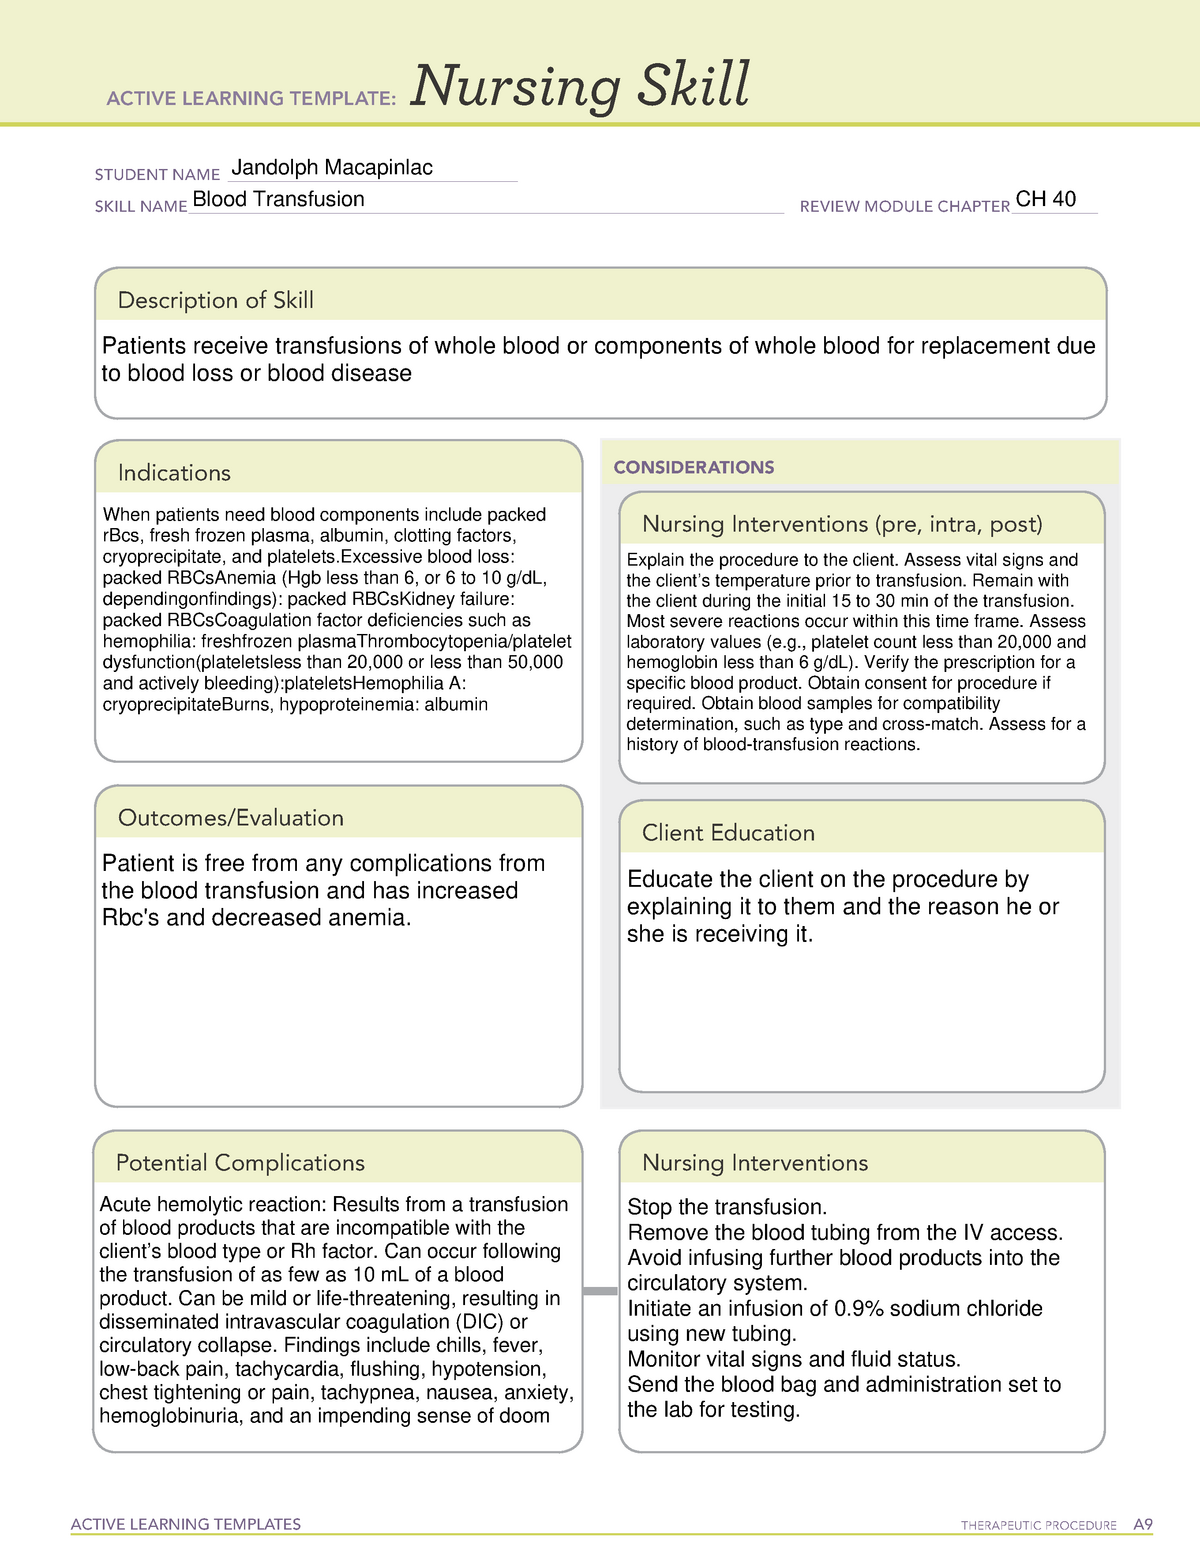 Blood Transfusion Remediate.pdf help - ACTIVE LEARNING TEMPLATES ...